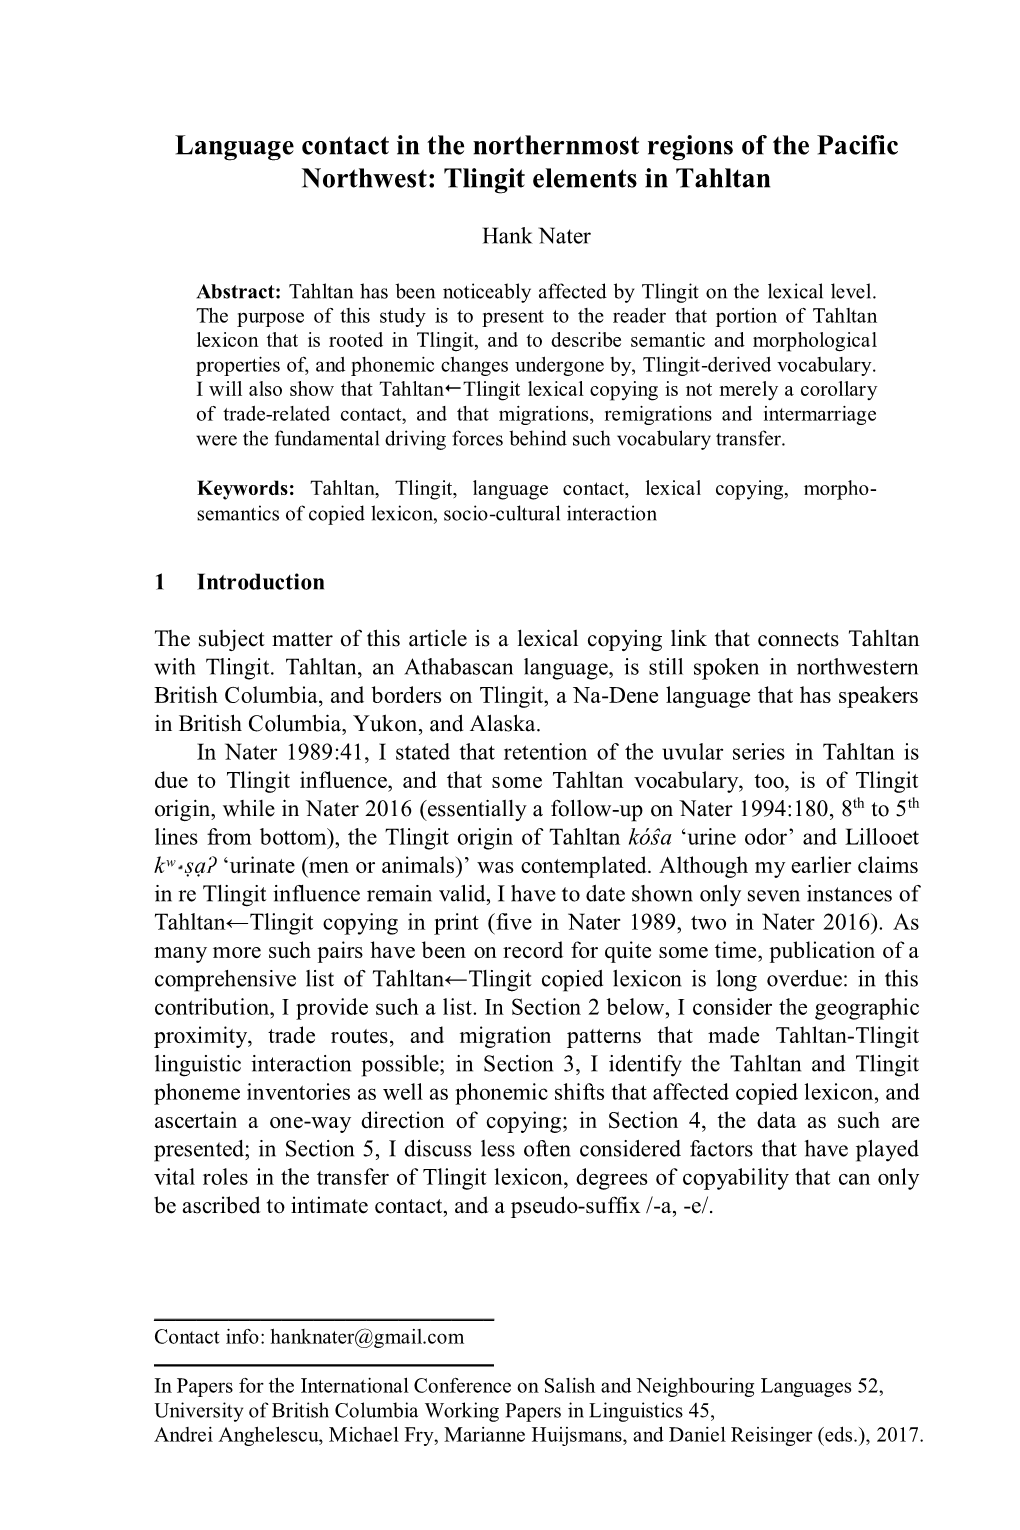 Language Contact in the Northernmost Regions of the Pacific Northwest: Tlingit Elements in Tahltan